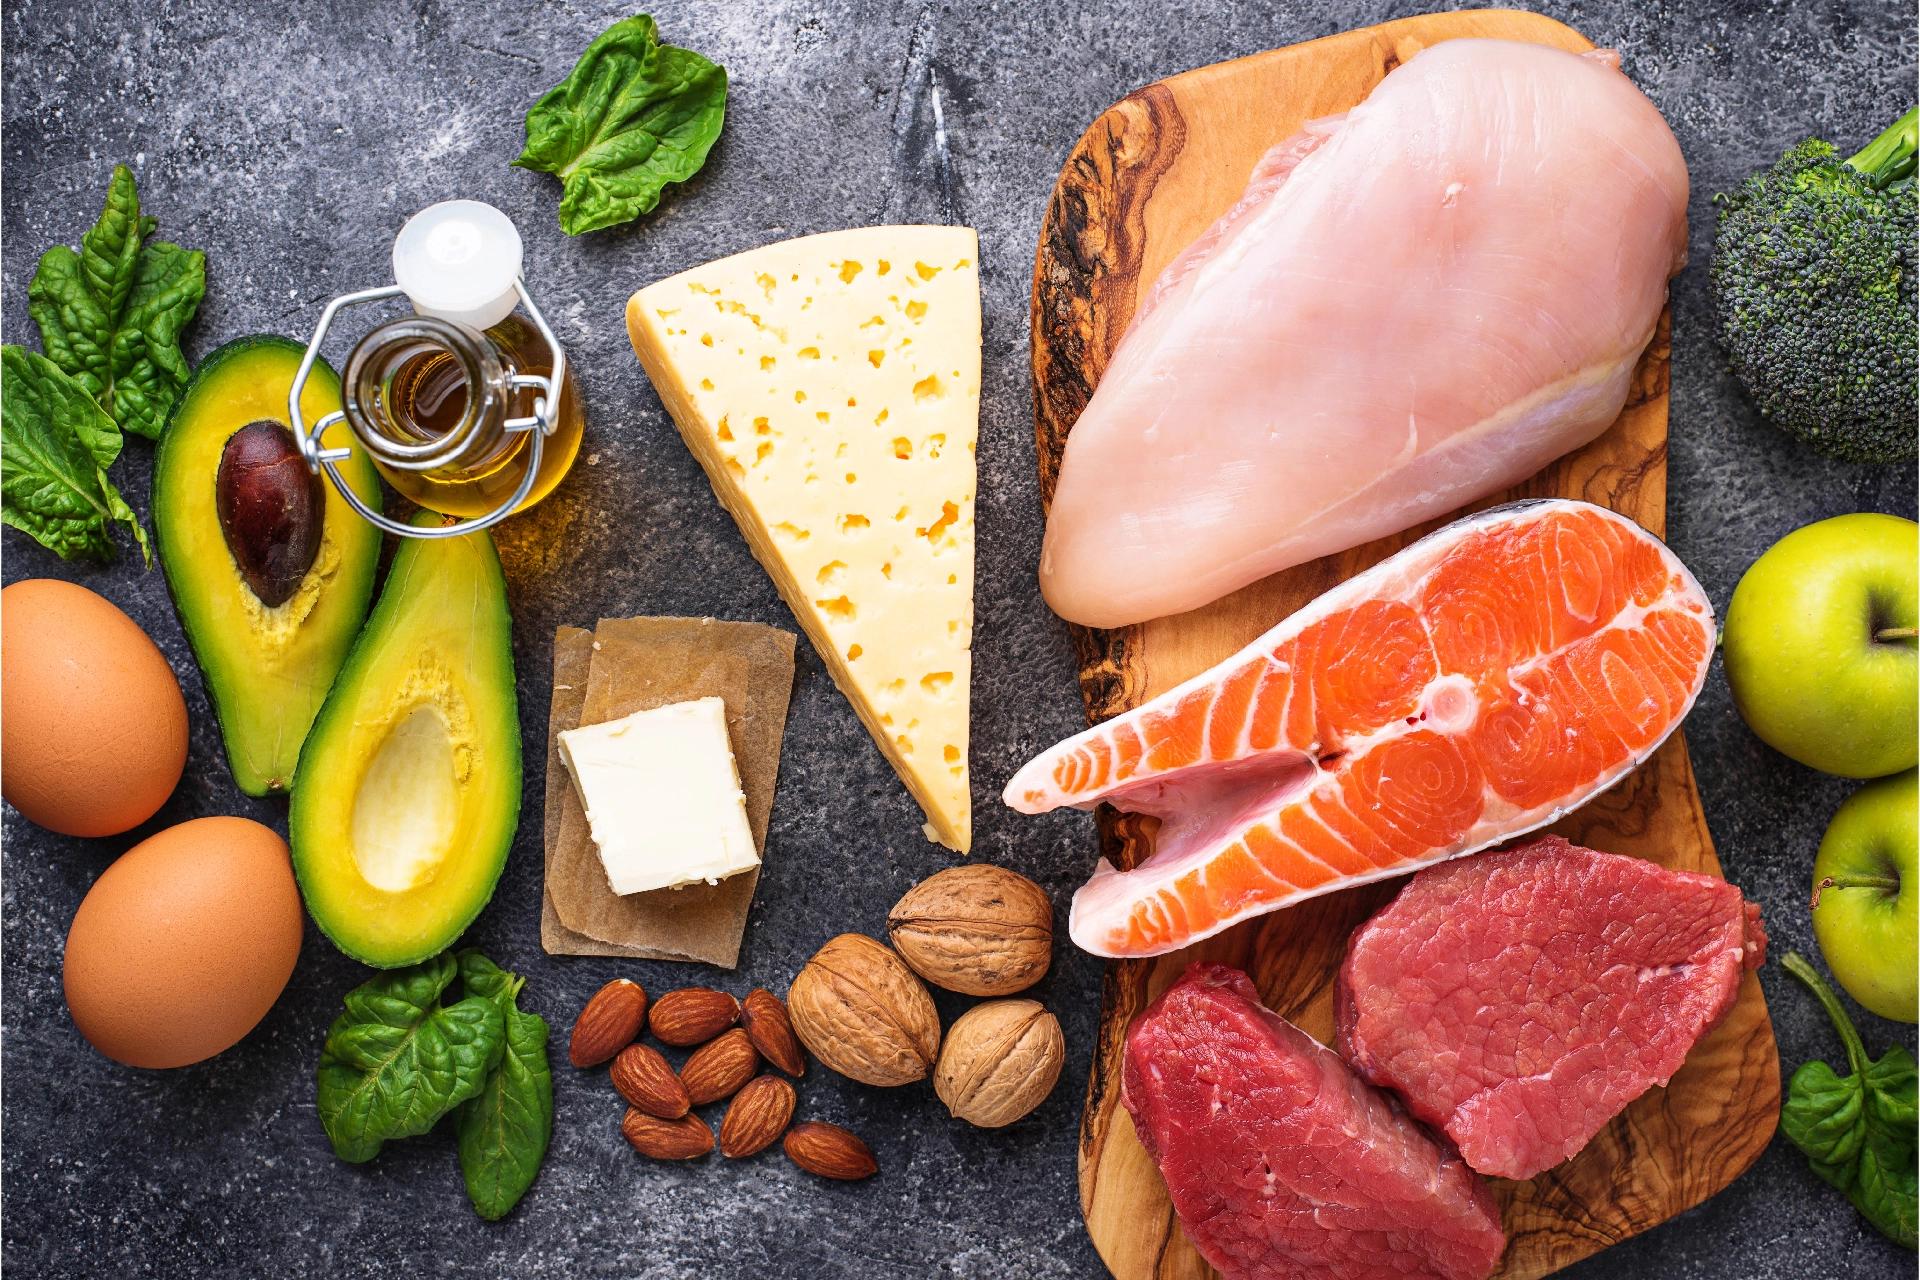 Keto Diet Plan: Learn What to Eat, Health Benefits and More